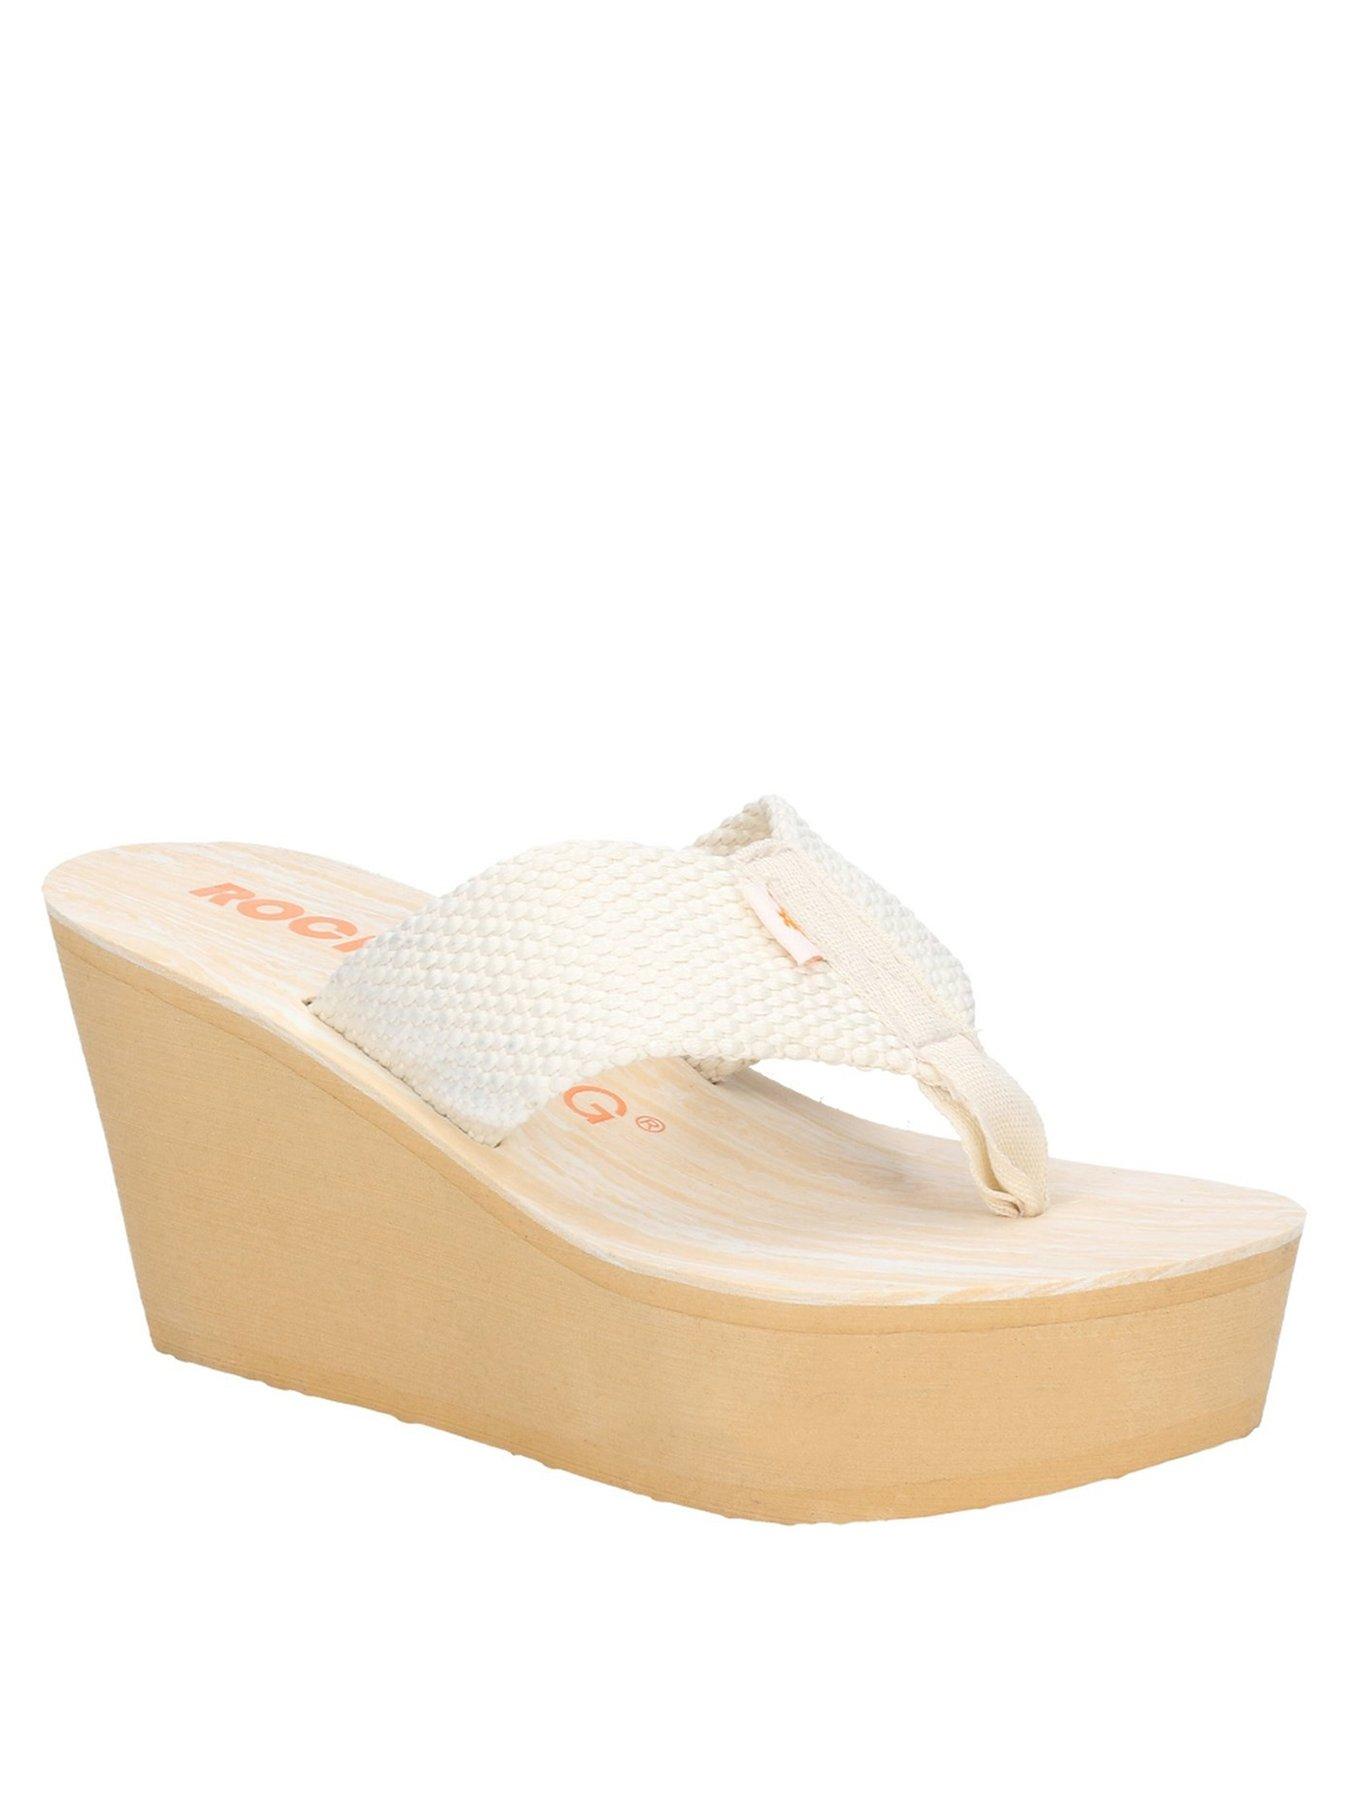 3 inch white wedges